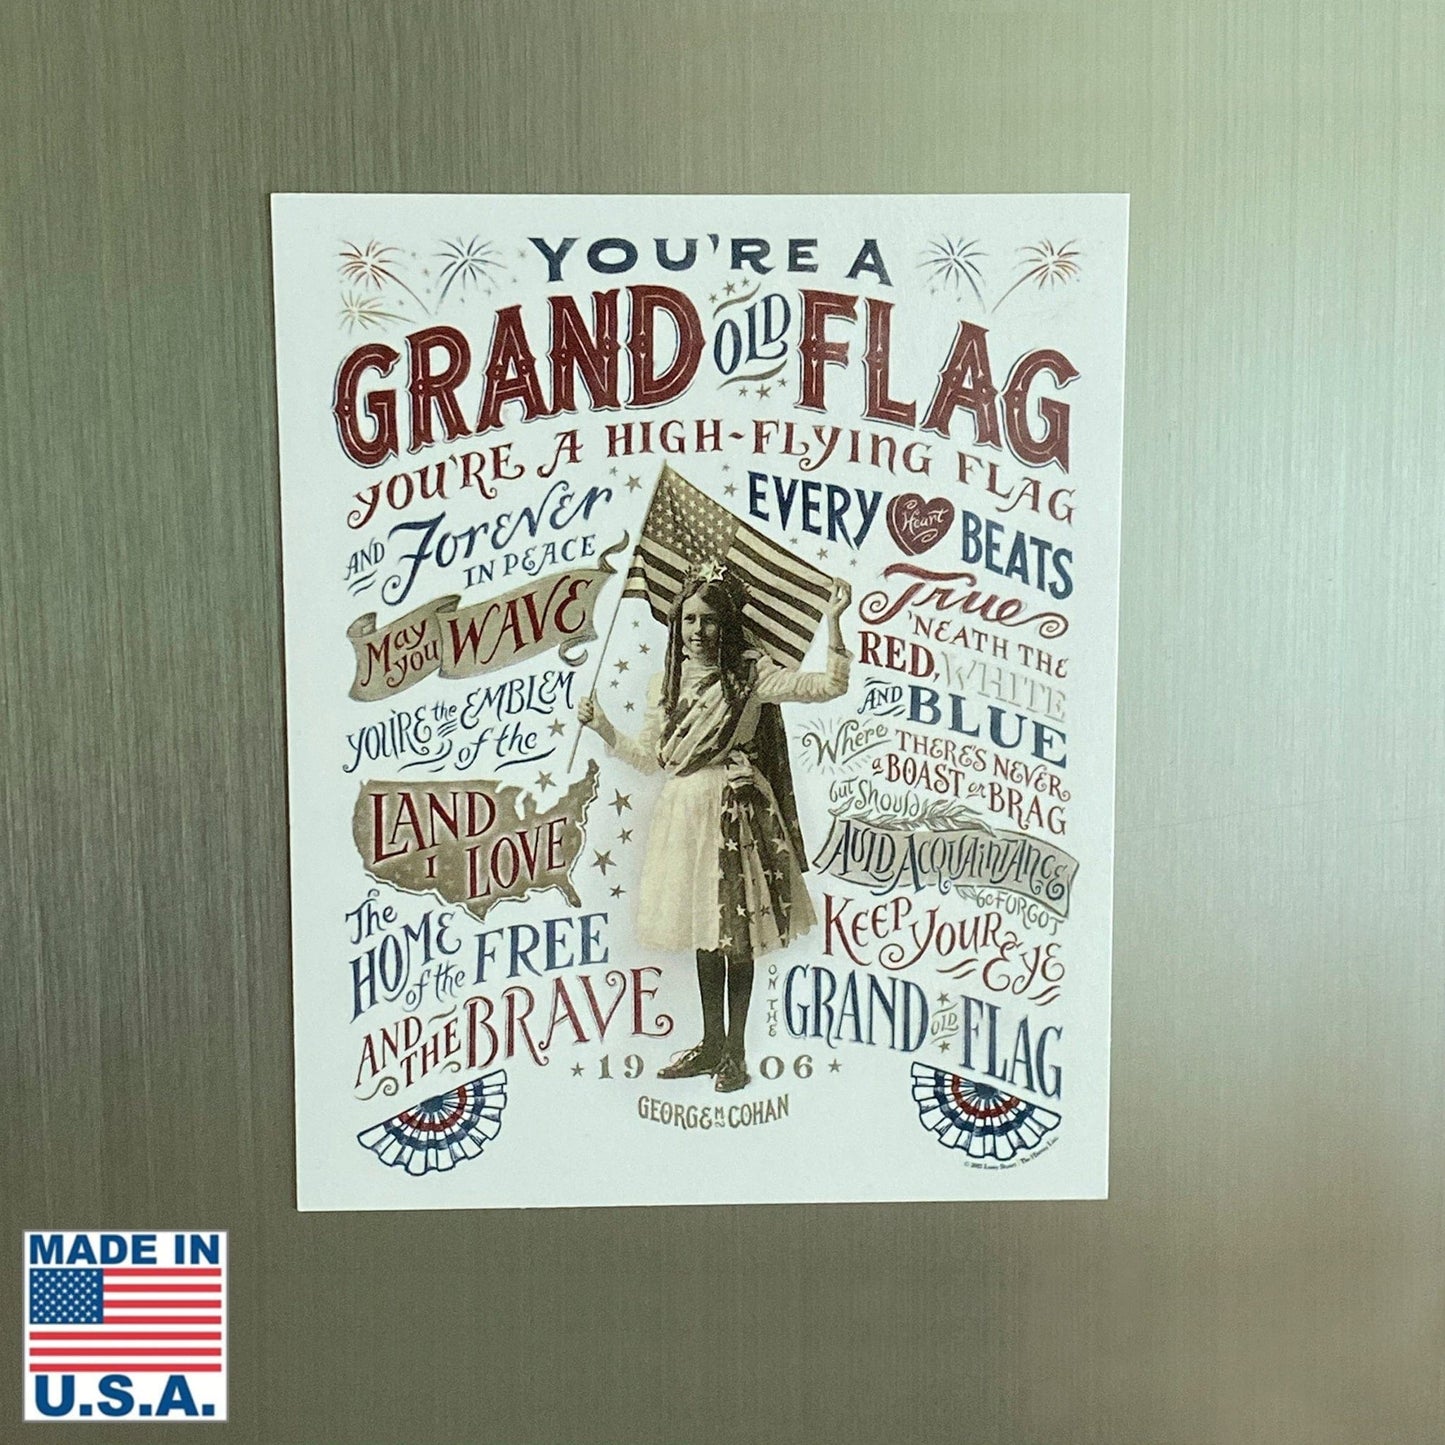 "Grand Old Flag" Magnet from the History List Store